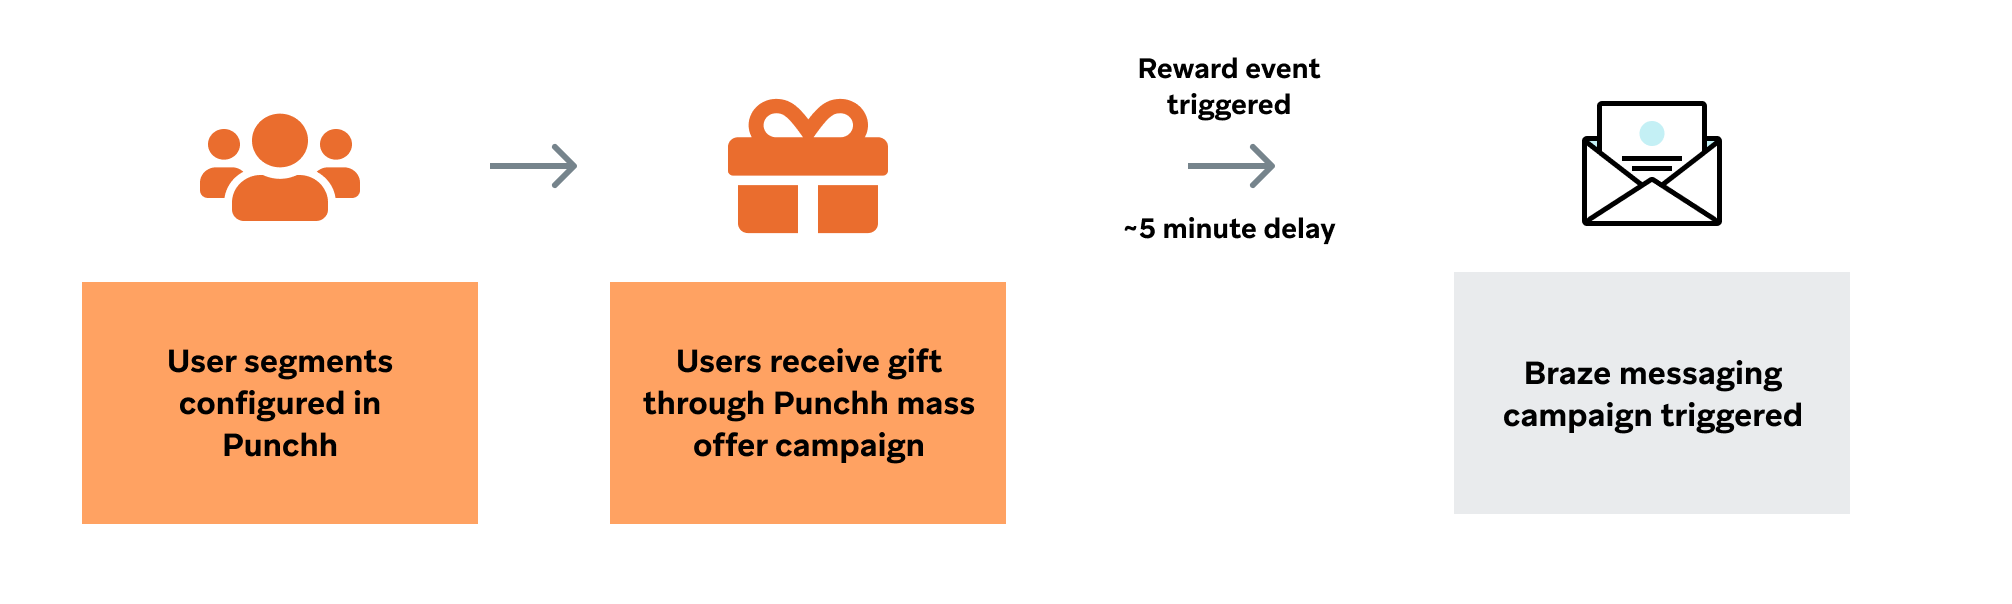 A user segment can be configured in Braze, and the users are sent to Punchh custom segment through a Braze webhook with segment and user ID. After this, the user receives a gift through Punchh mass offer campaign with a custom segment. After this the reward event is triggered.